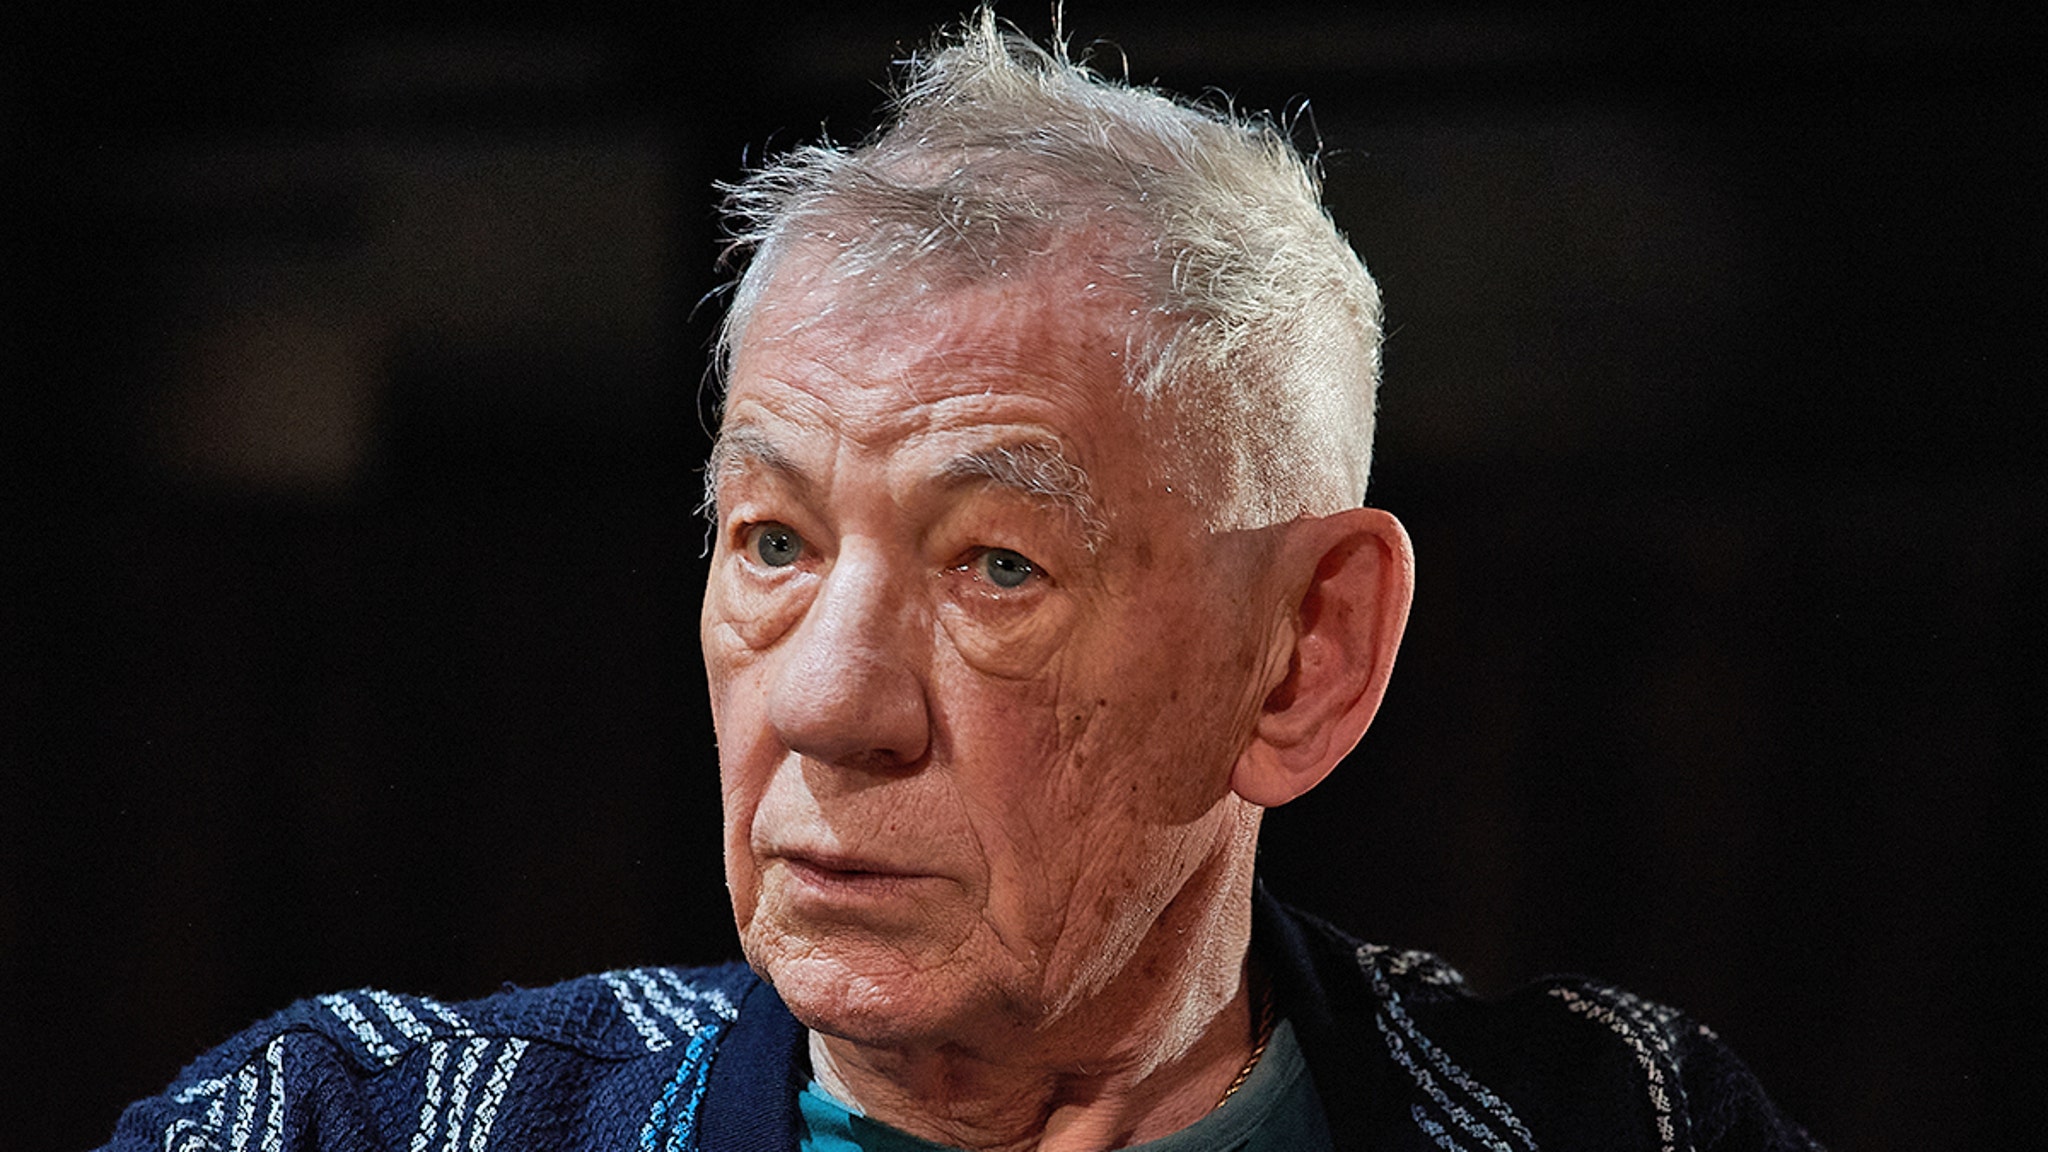 Ian McKellen admitted to hospital after falling off stage during a performance in London